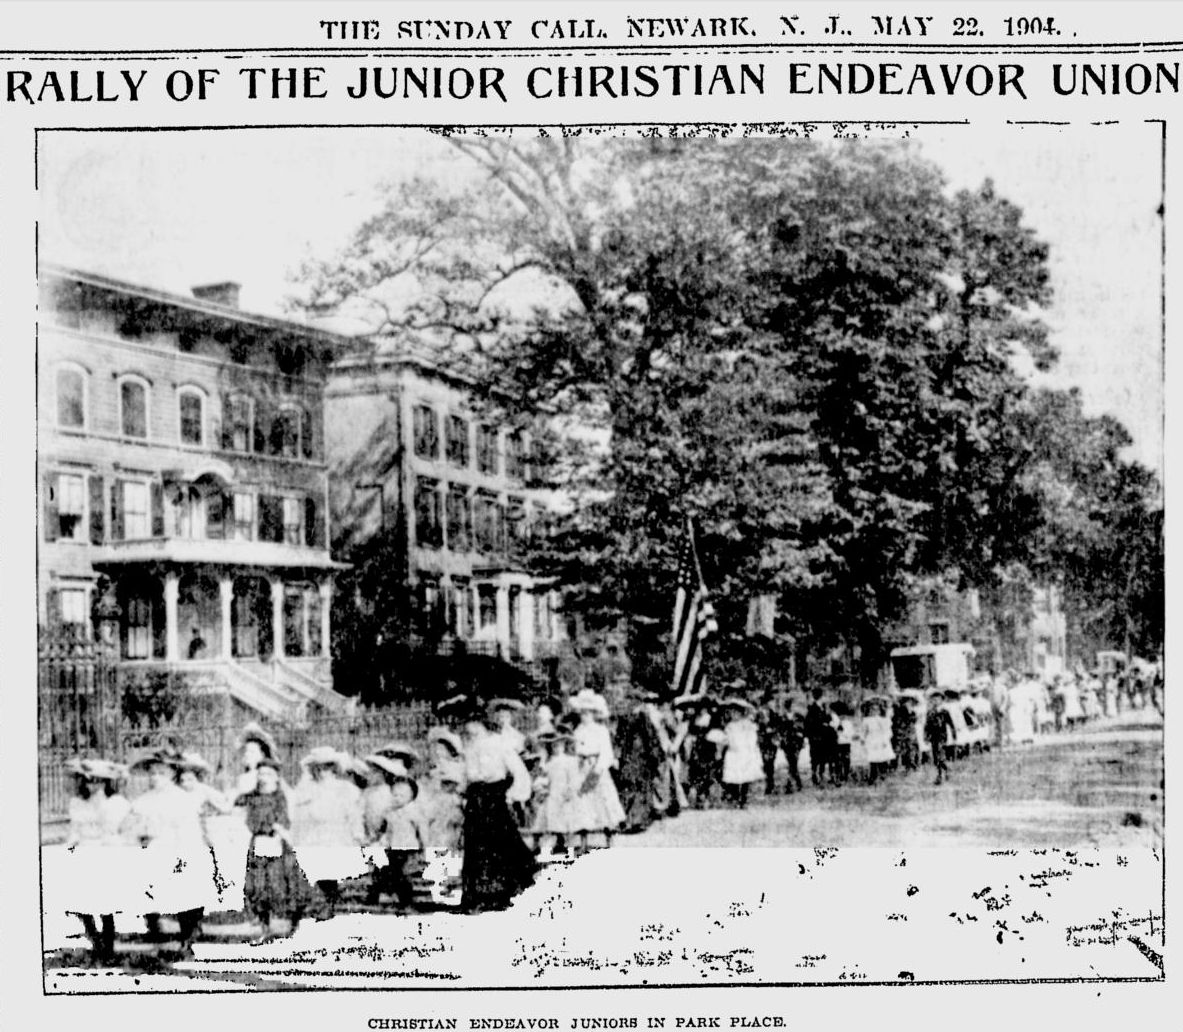 Rally of the Junior Christian Endeavor Union
Marching on Park Place
